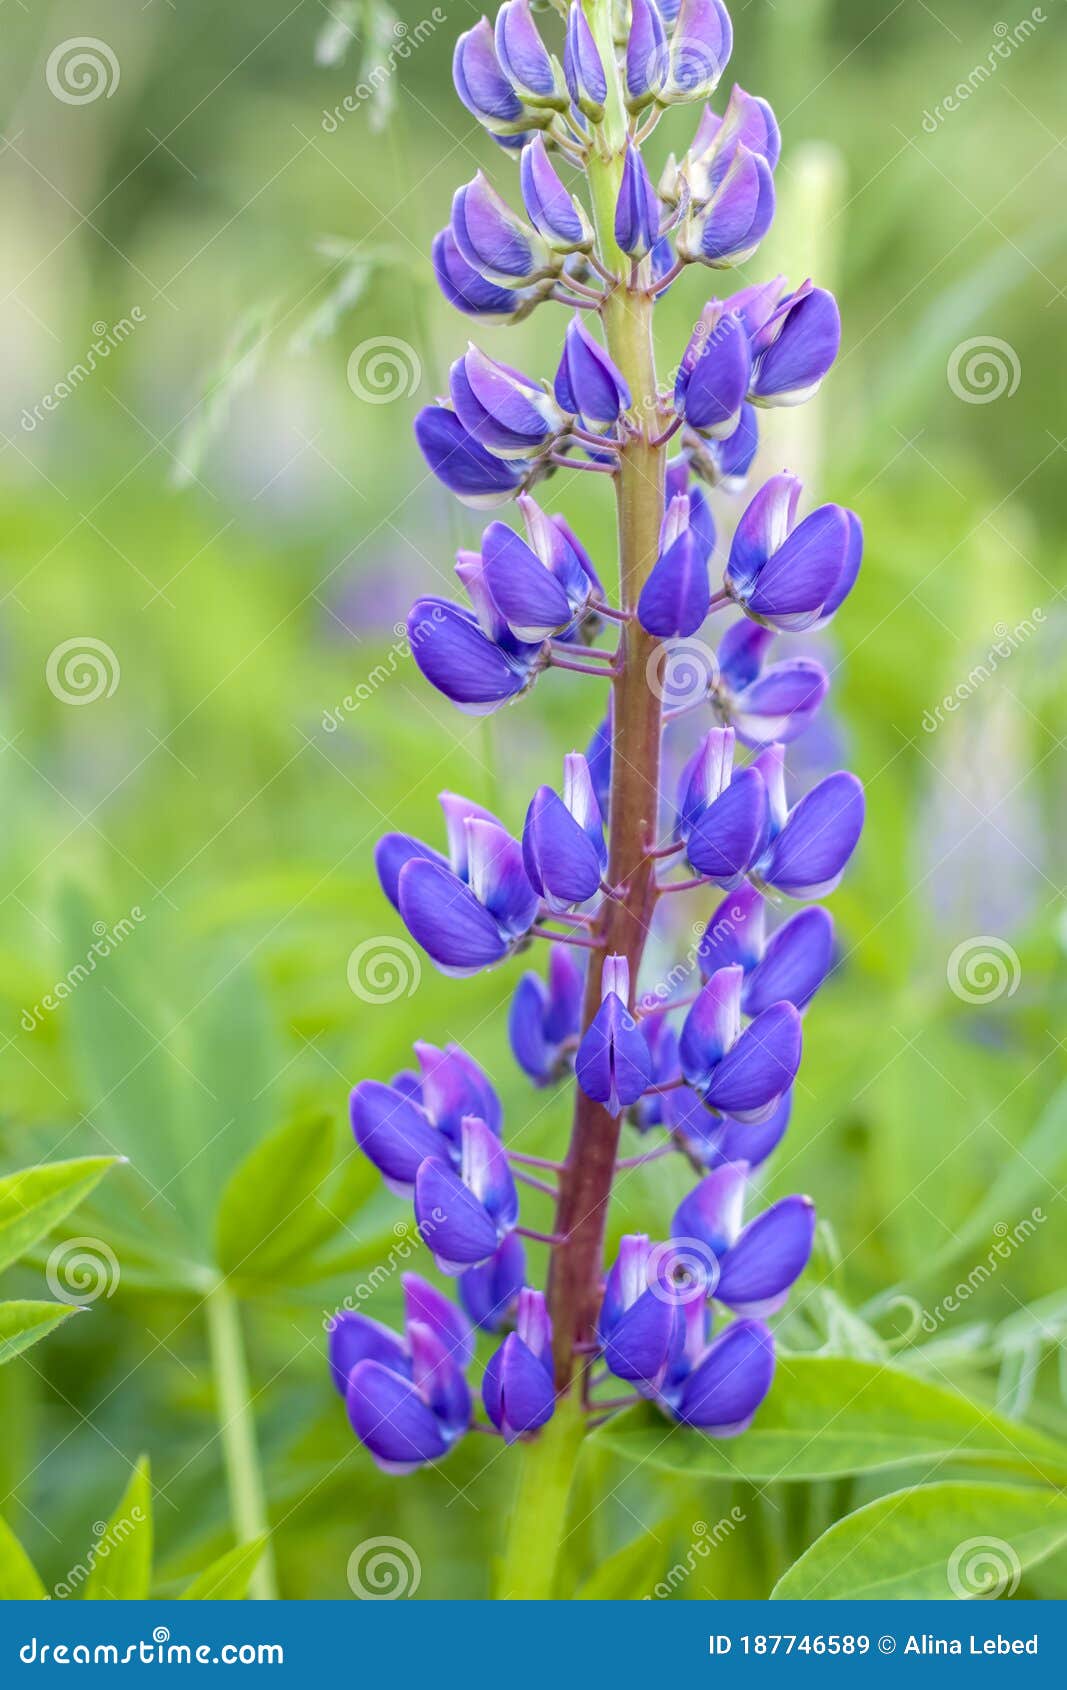 Lupin S Flower Lupine Wildflowers With Purple And Blue Flower Bouquet Of Lupines Summer Flower Background Stock Image Image Of Purple Wild 187746589